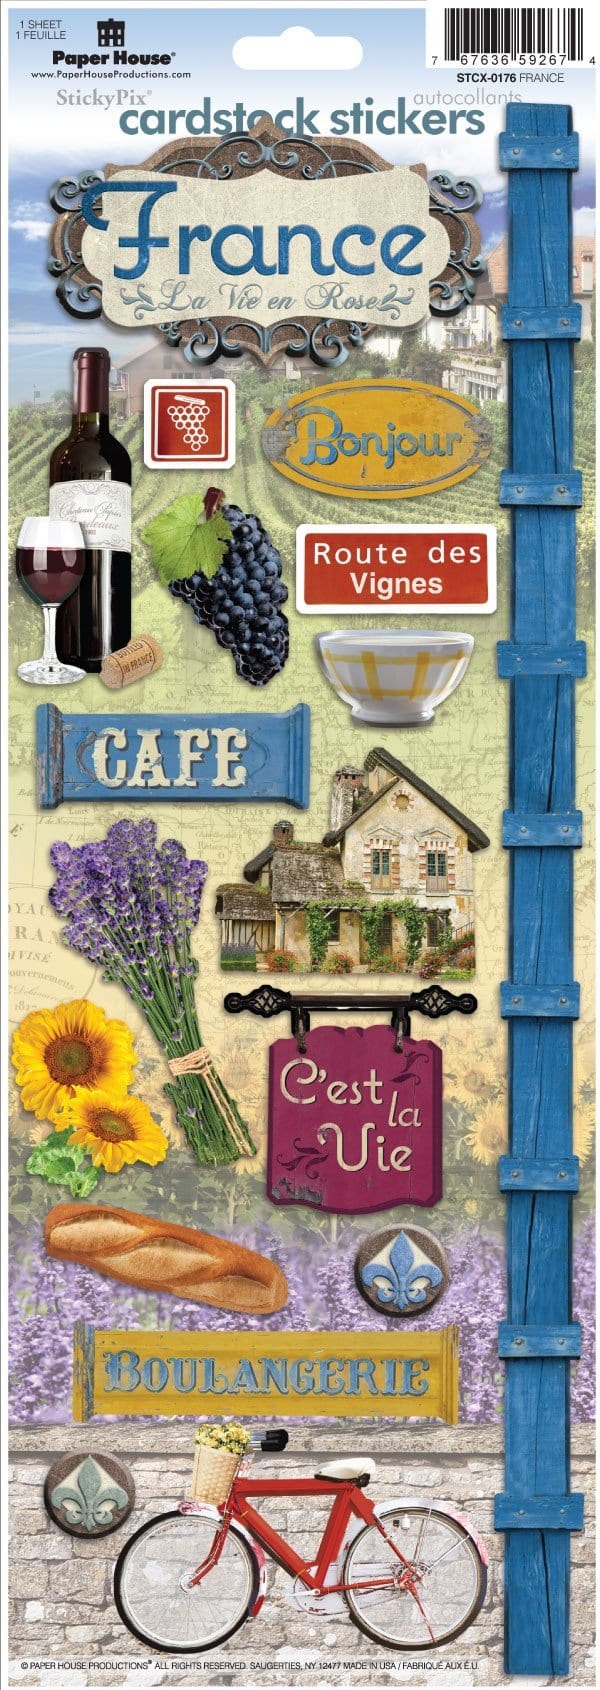 France cardstock stickers